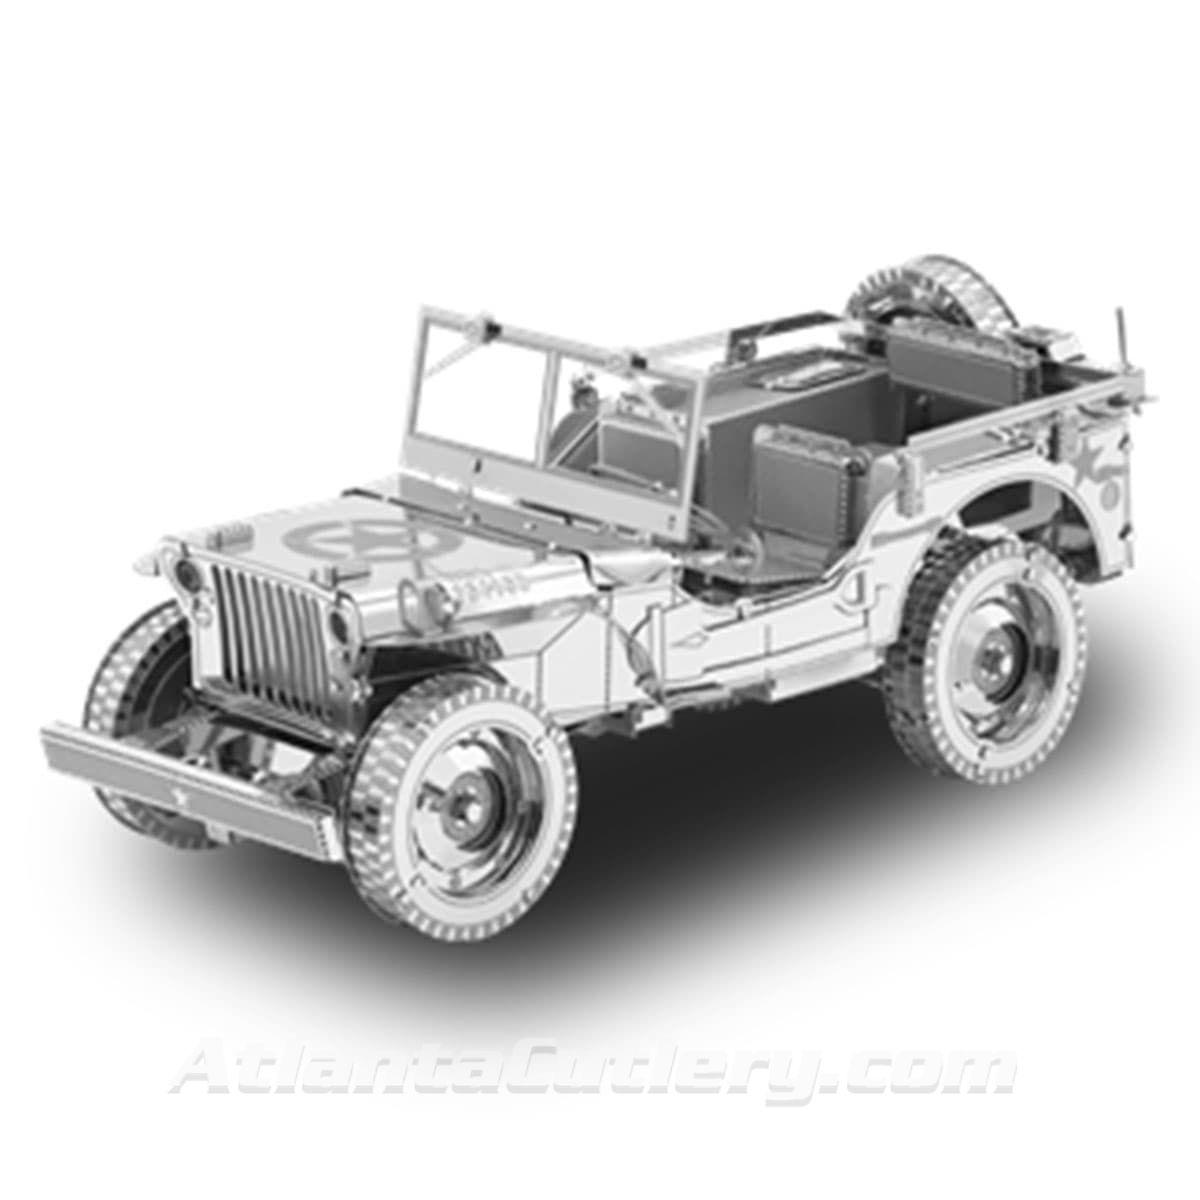 Pocket-sized, laser-cut stainless steel Willys Overlands model assembled from two laser-cut sheets, challenging difficulty level